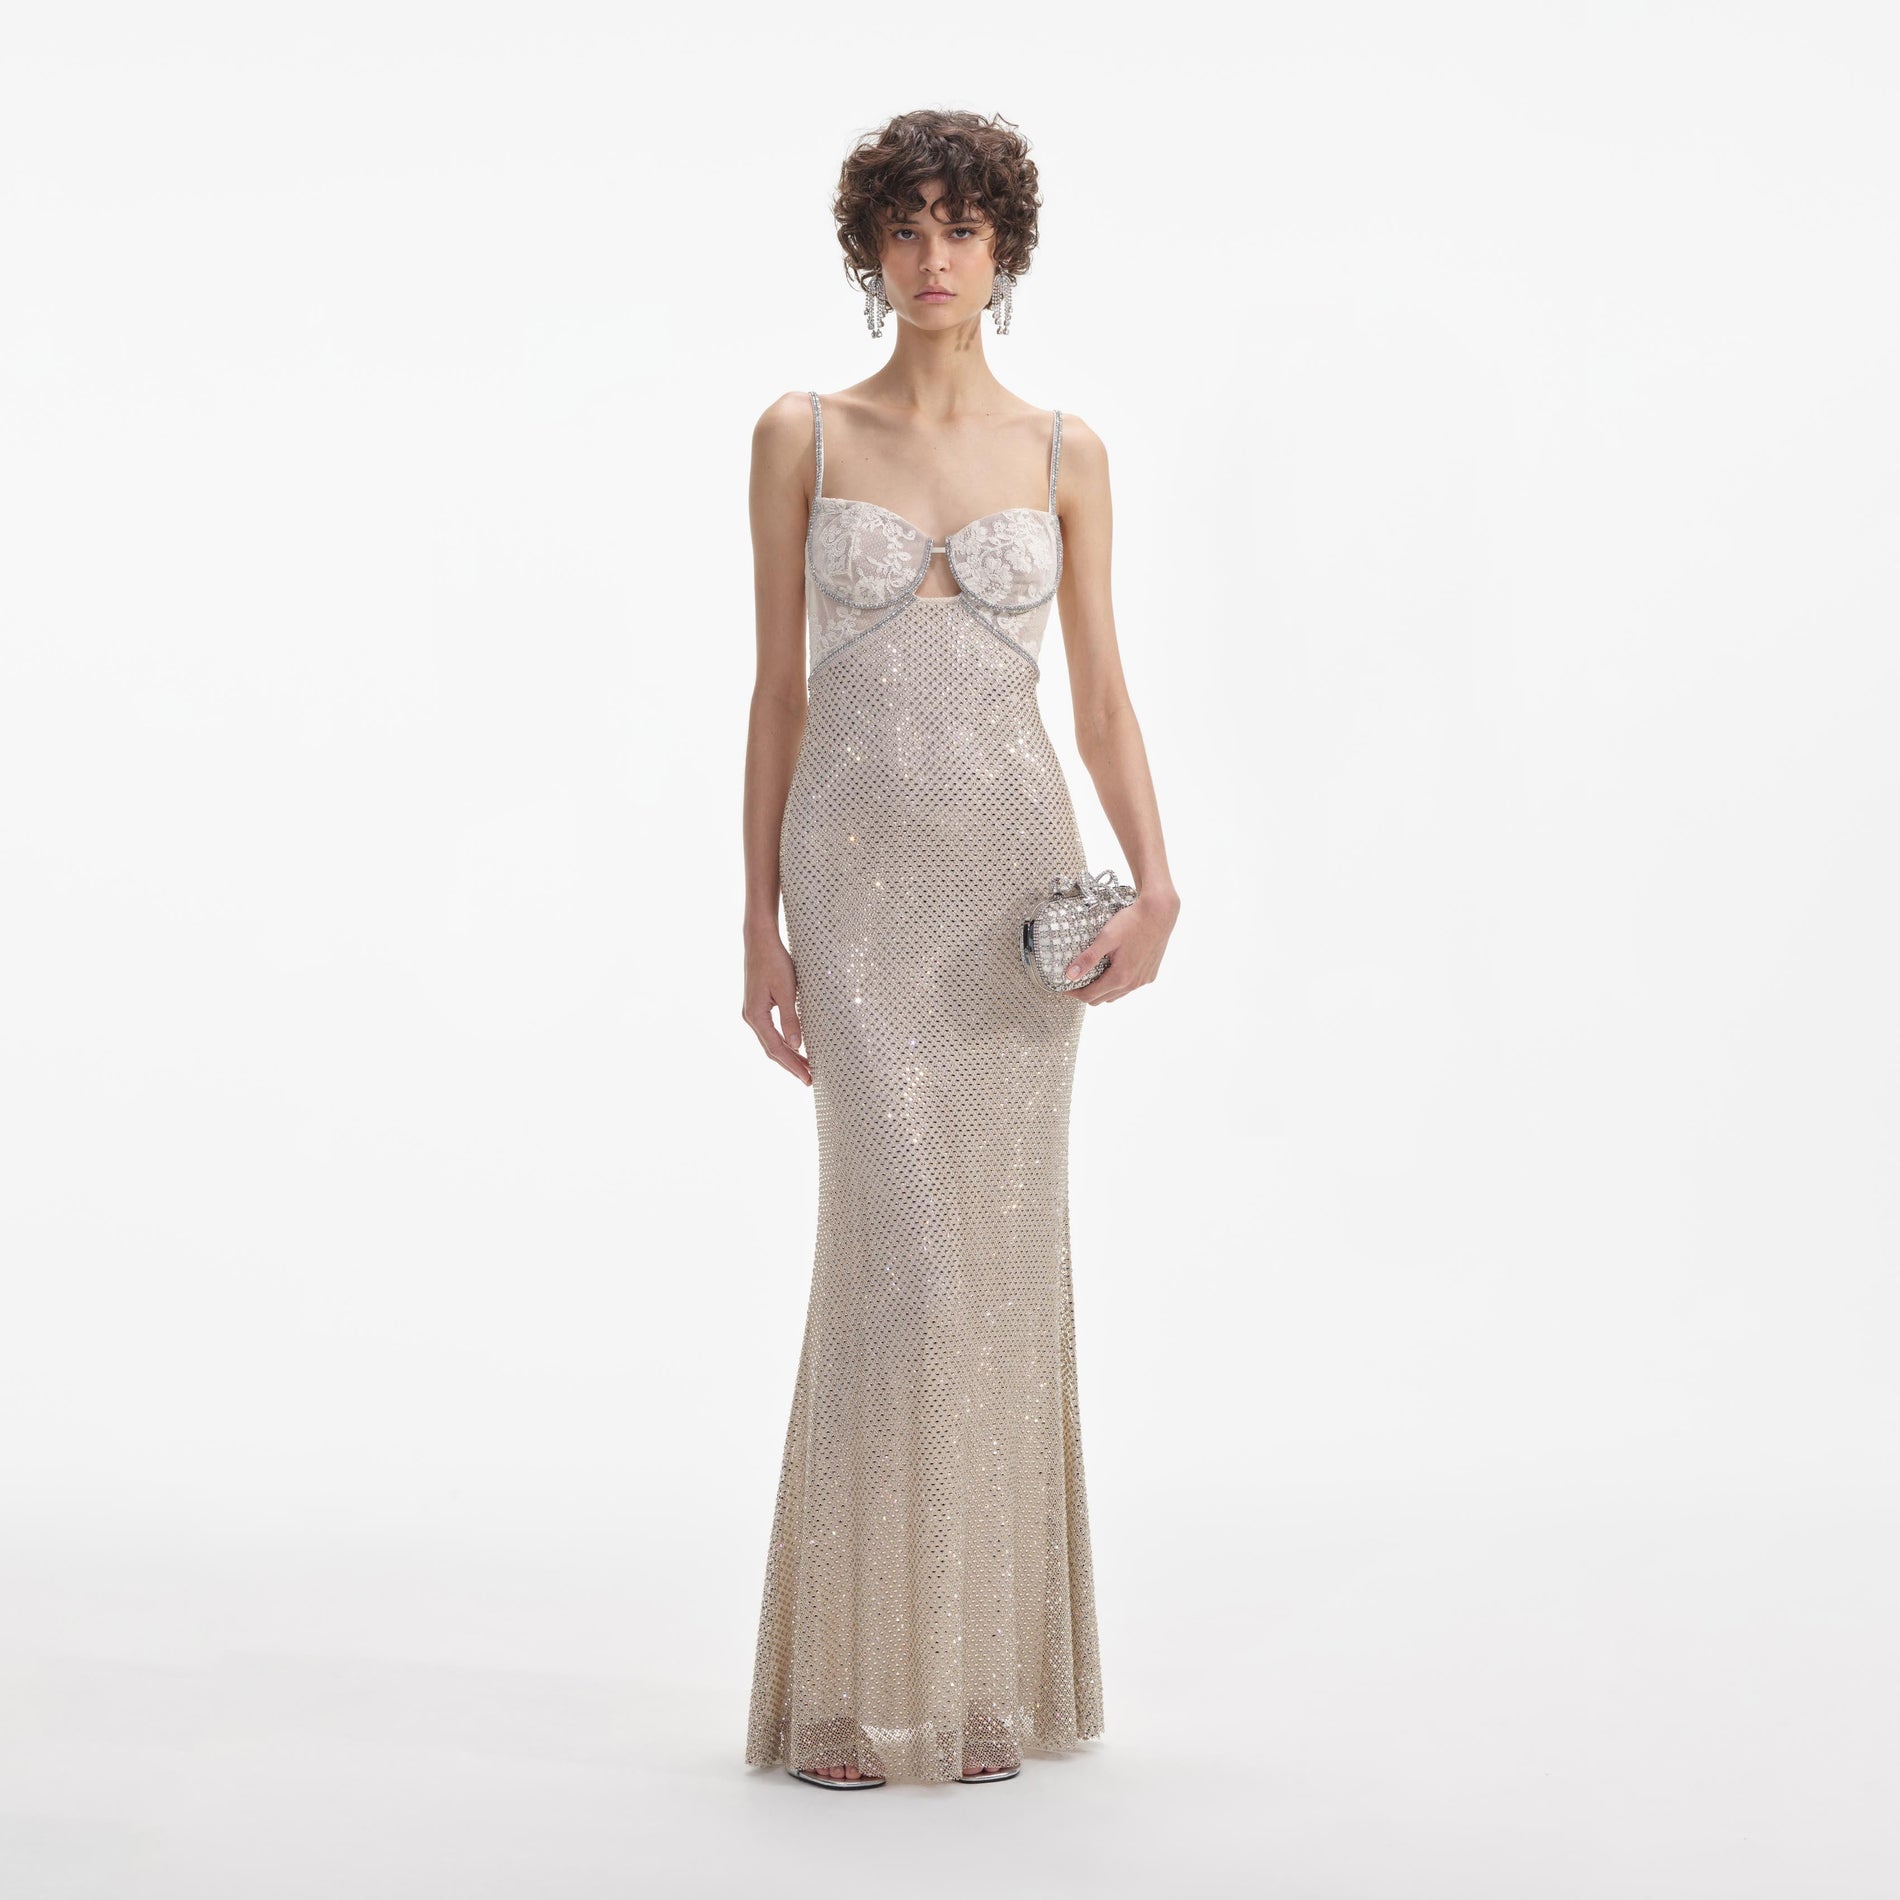 Front view of a woman wearing the Cream Rhinestone Mesh Maxi Dress